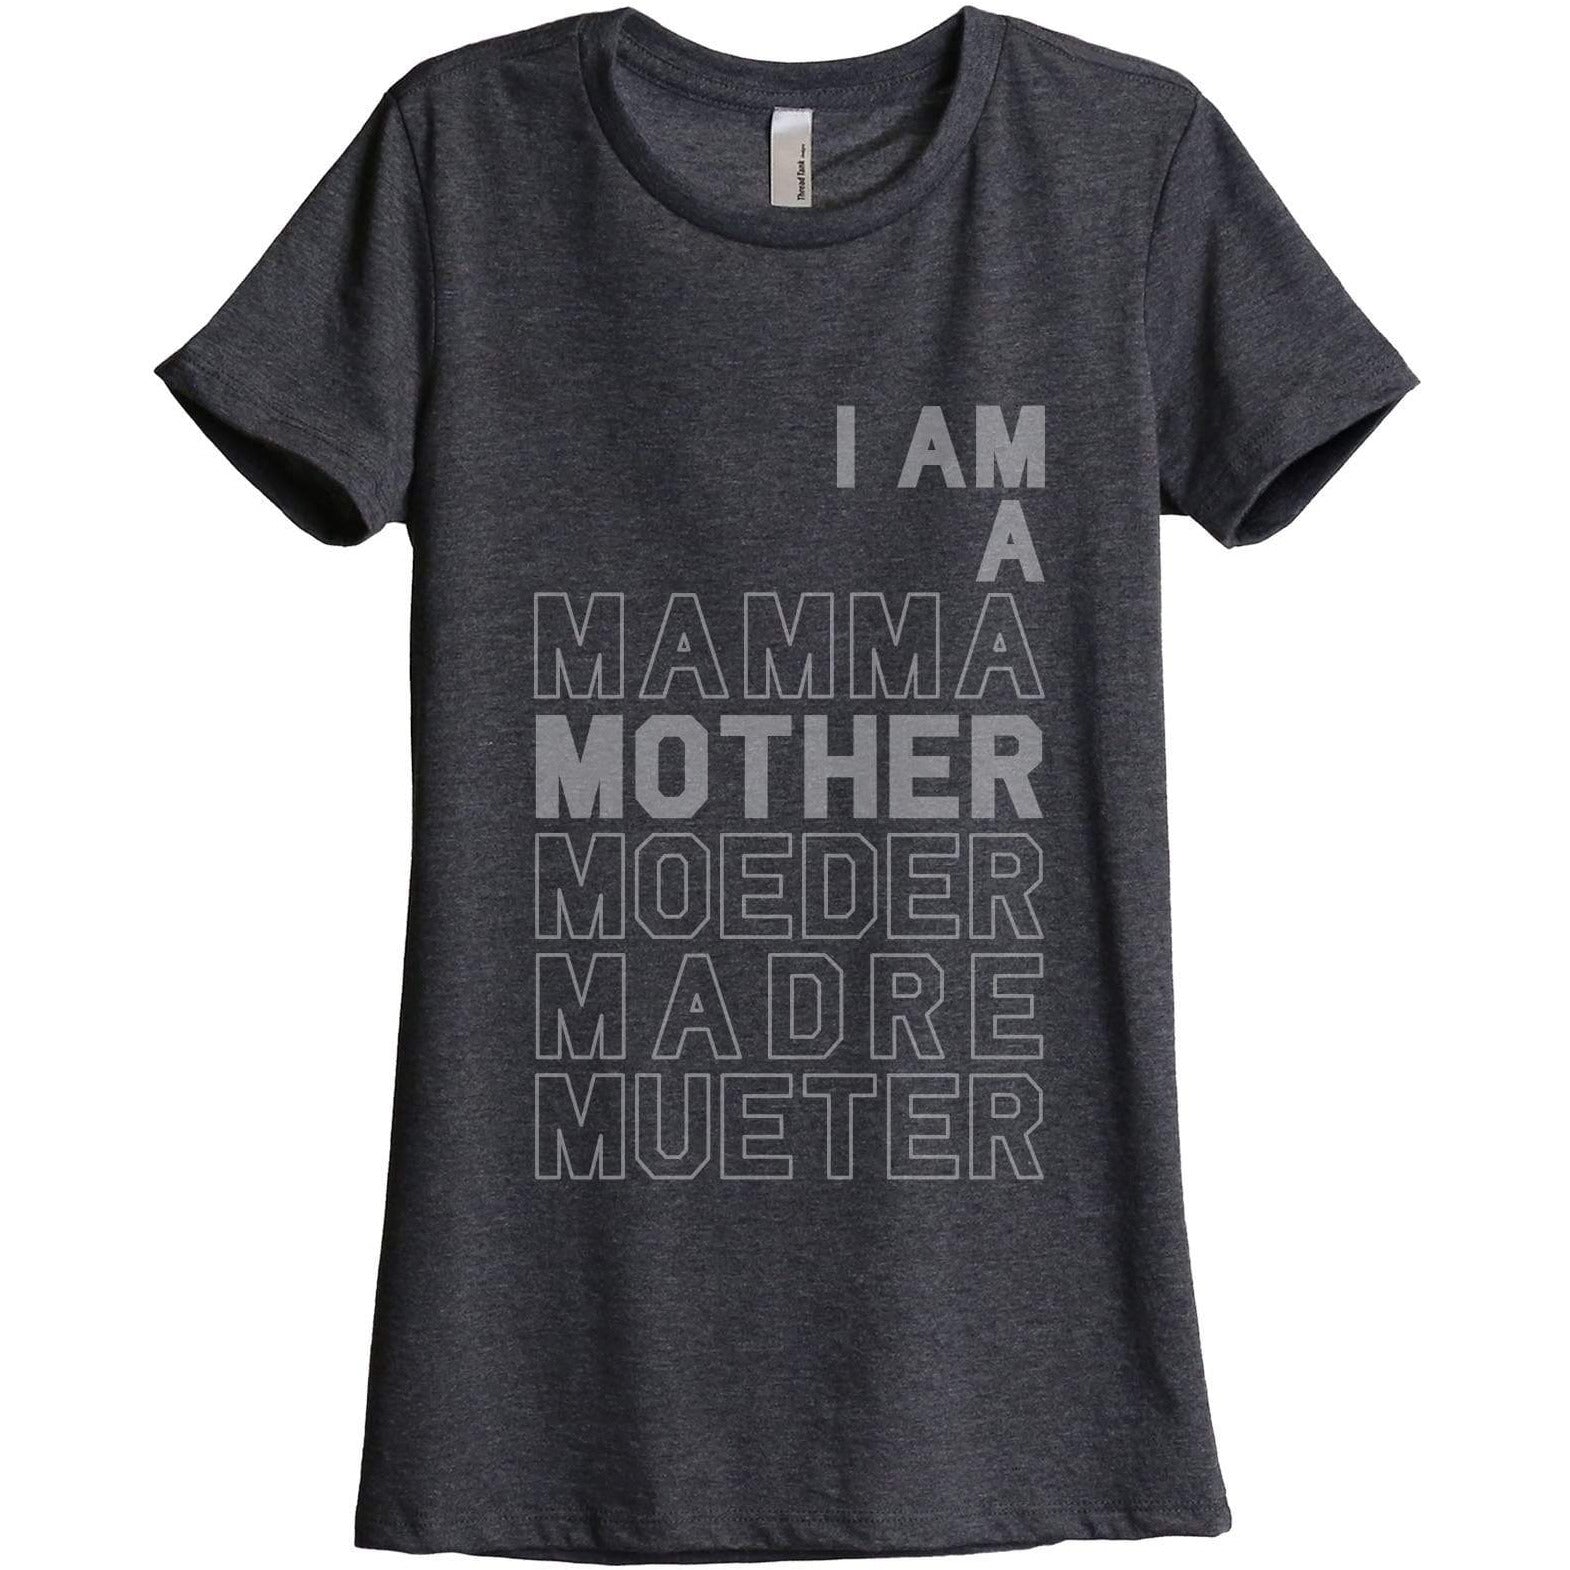 I Am A Mamma Mother Madre Women's Relaxed Crewneck T-Shirt Top Tee Charcoal Grey
